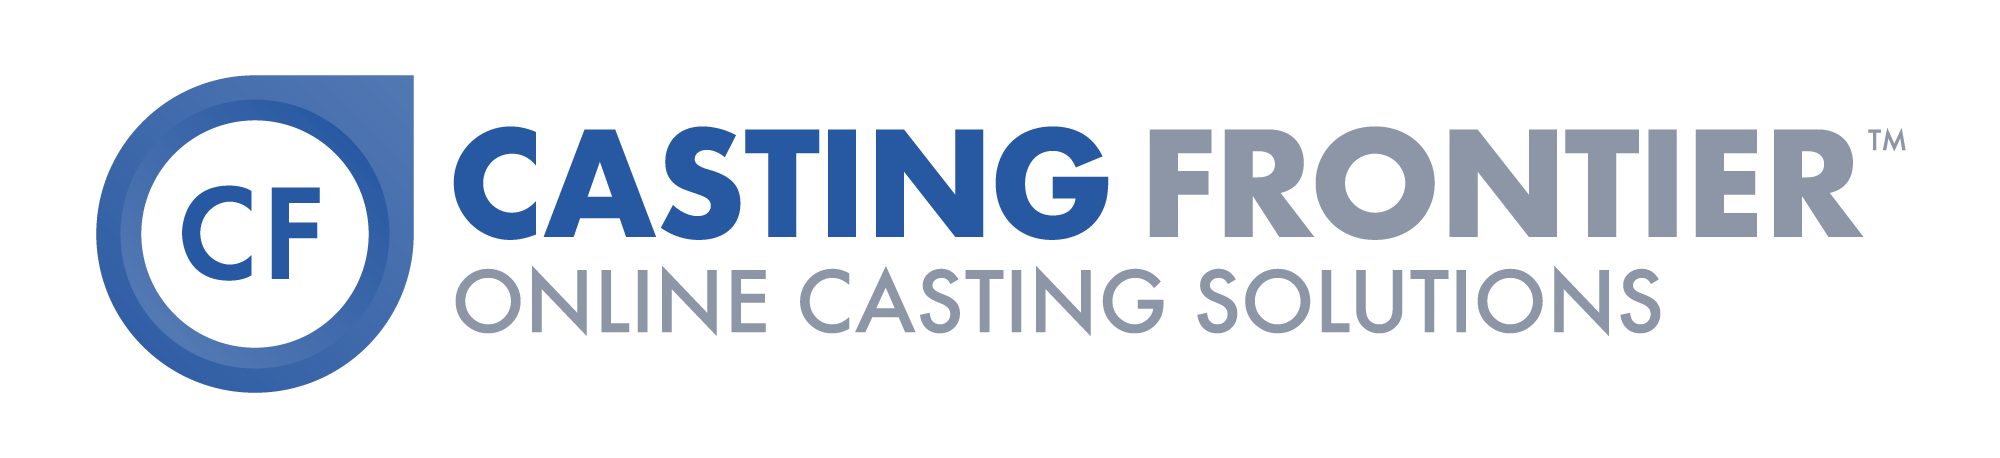 Casting Frontier